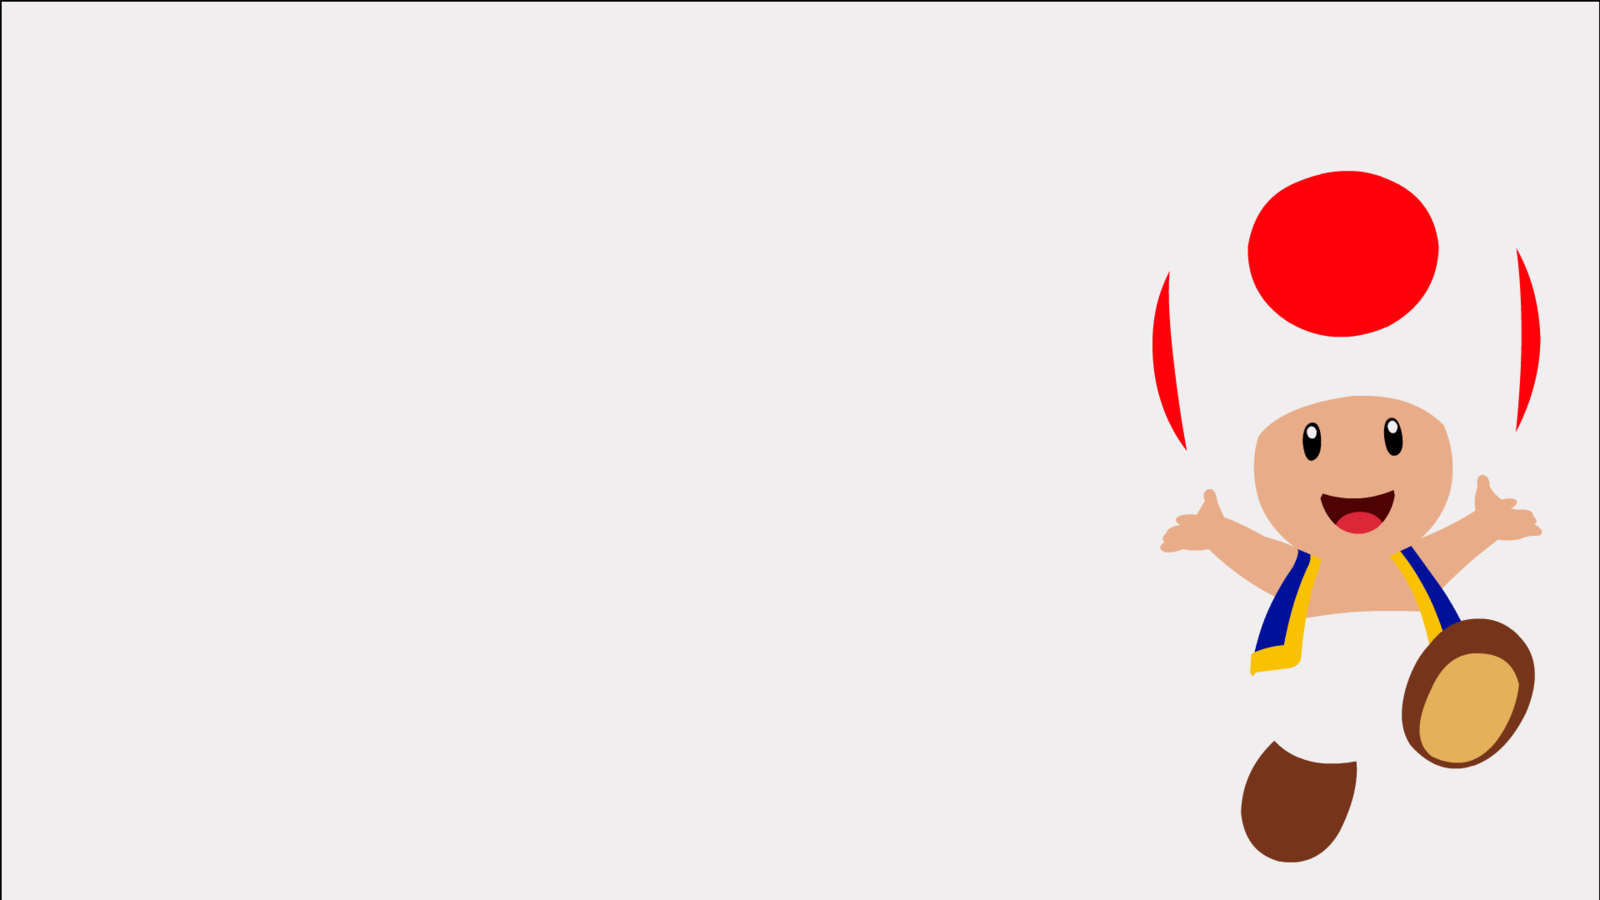 Minimalistic Wallpaper For The Unabashed Gamer « Delta Attack